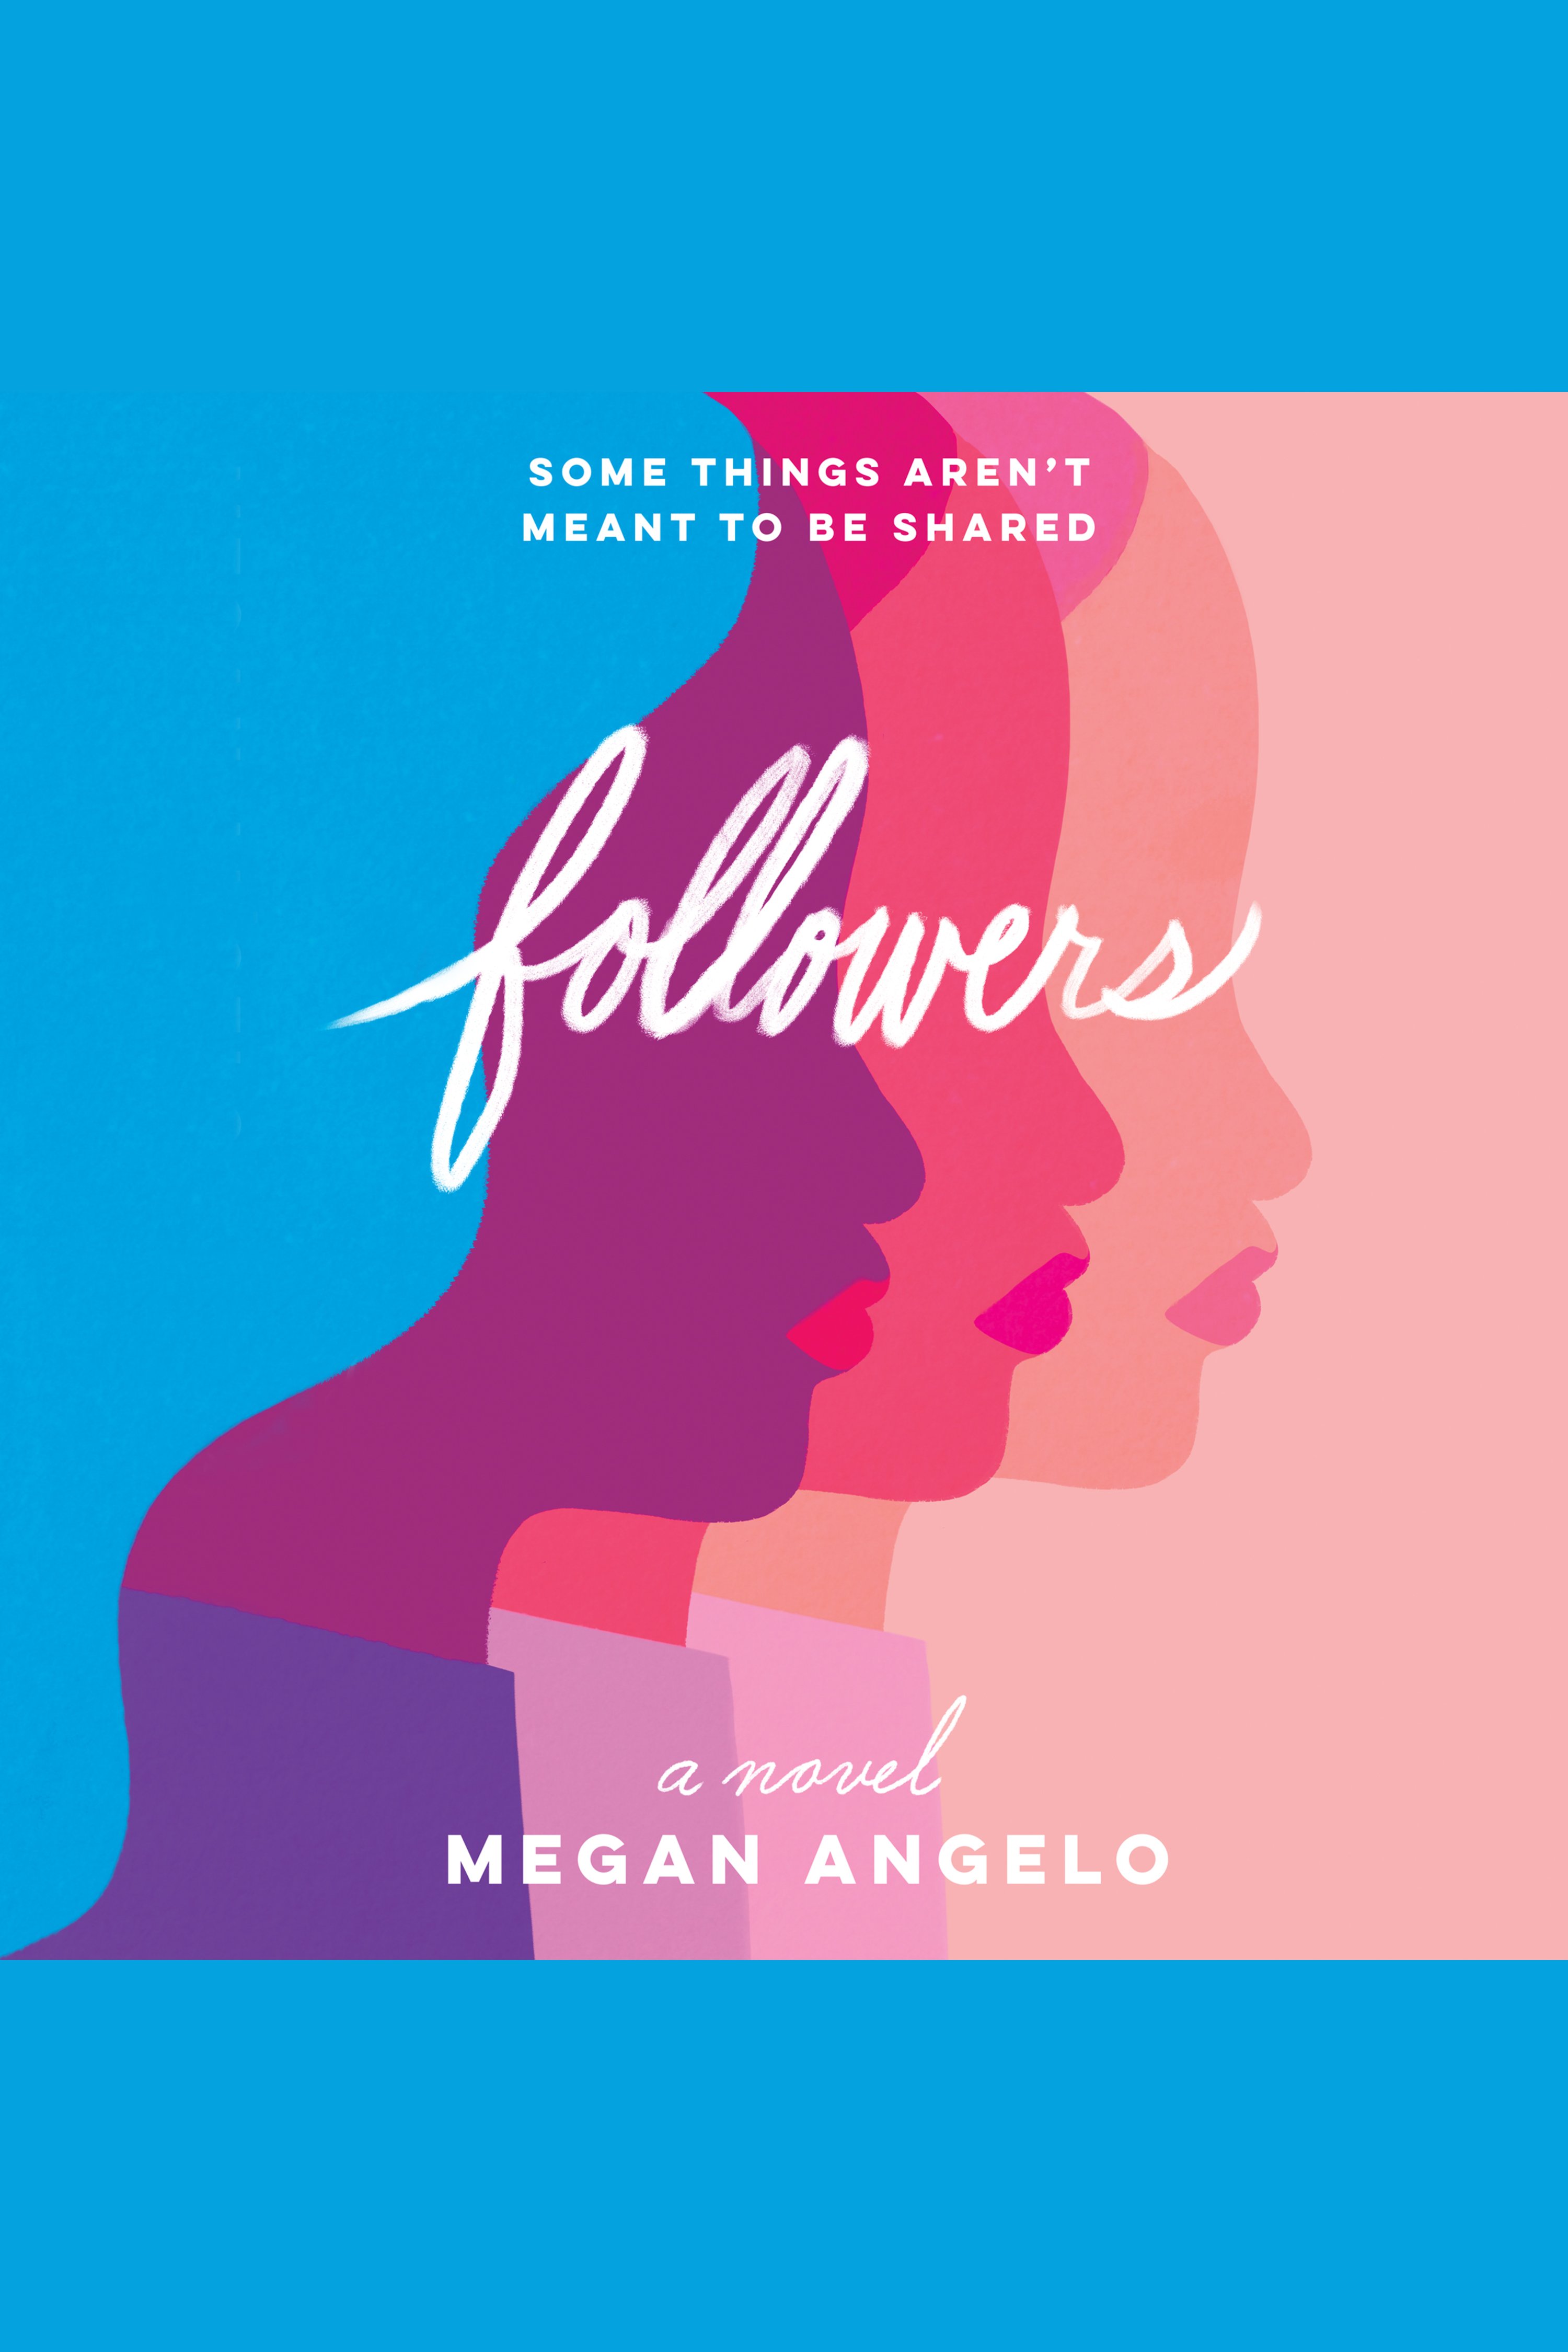 Followers cover image